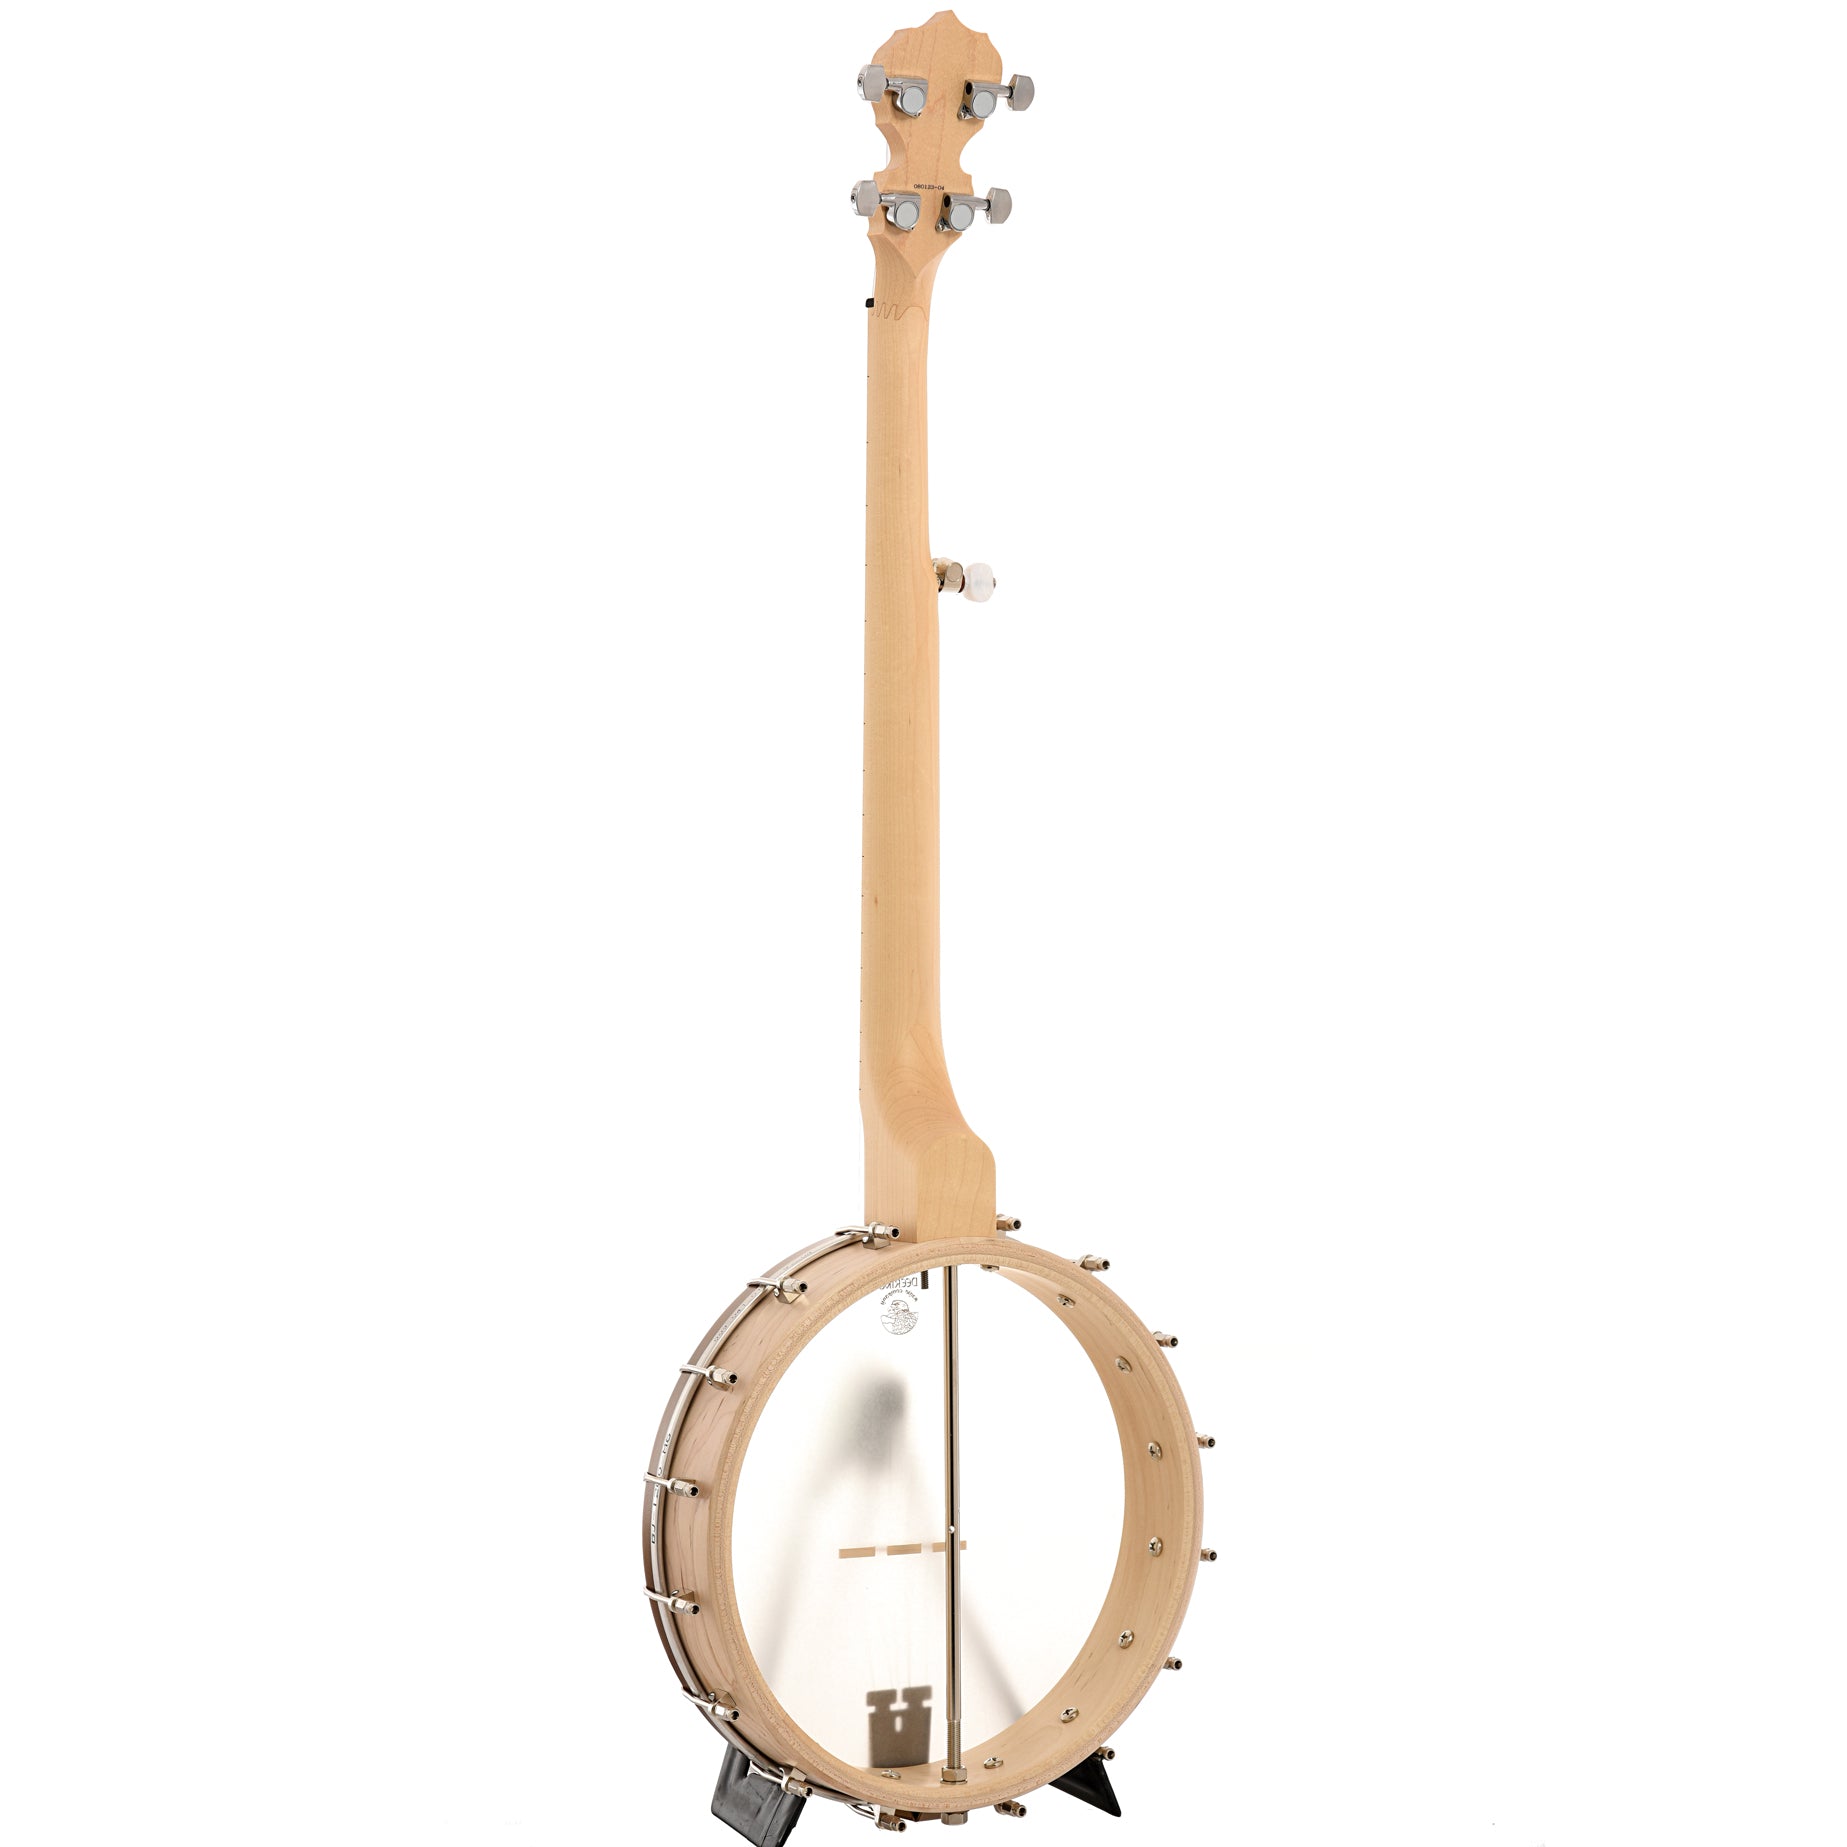 Full back and side of Deering Goodtime Americana Deco 12" Openback Banjo with Scooped Fretboard